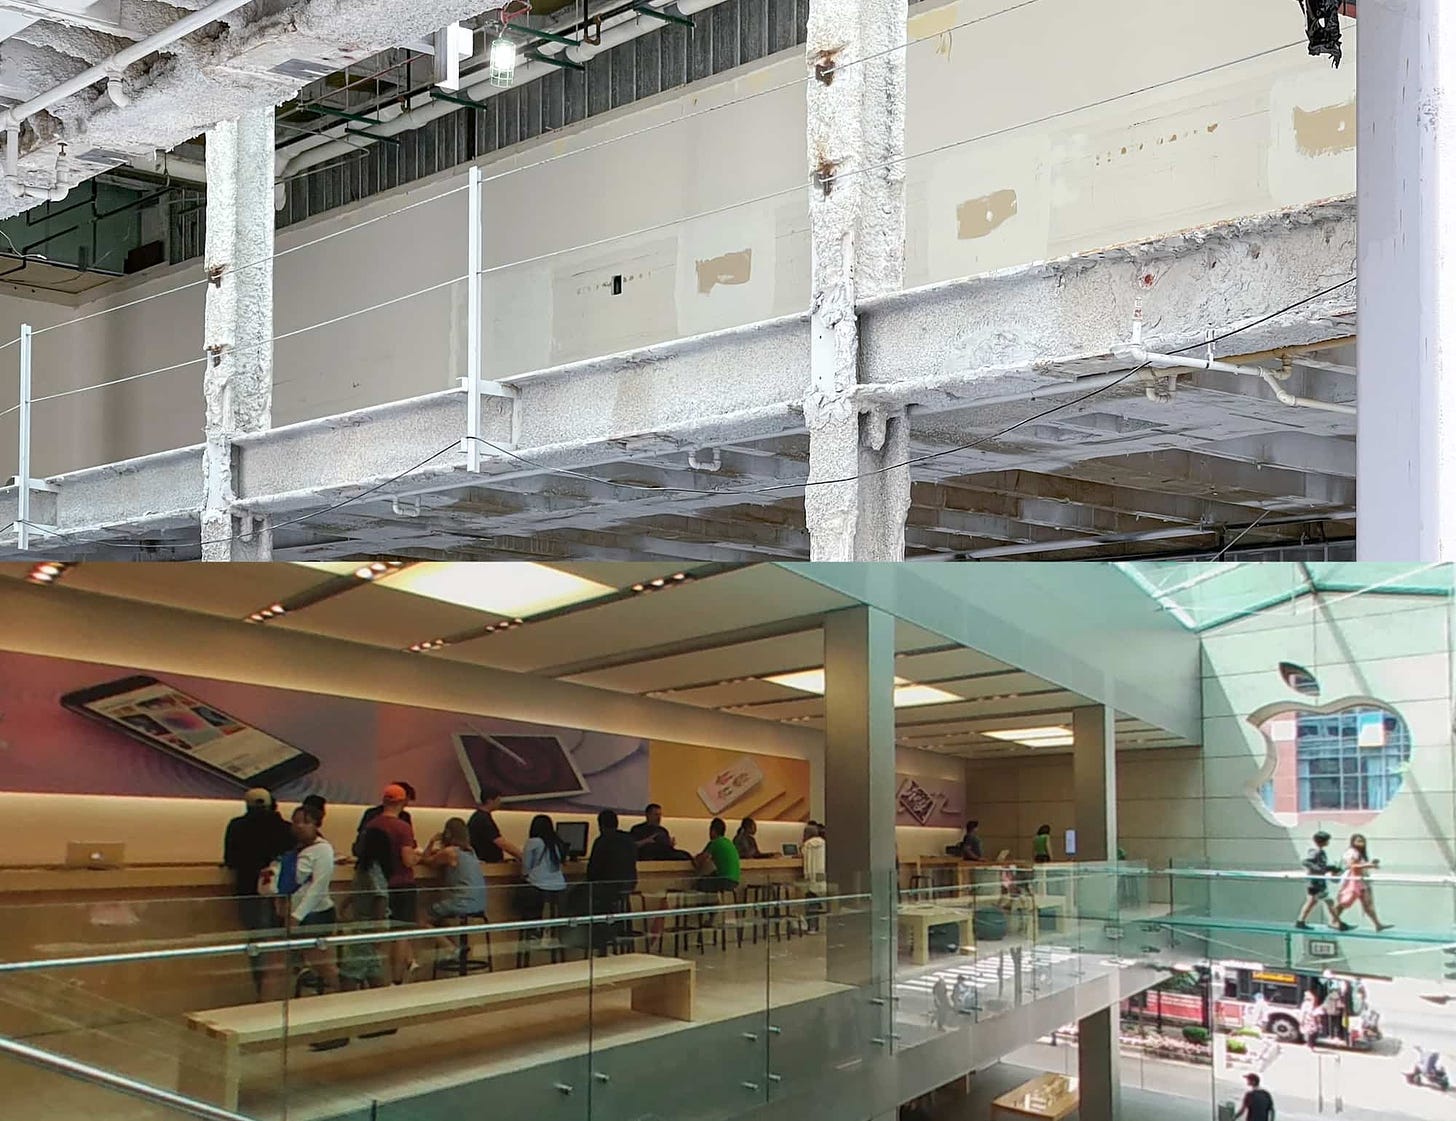 Top: September 2023, interior dismantlement at Apple North Michigan Avenue. Bottom: a photo of a similar perspective taken years earlier.